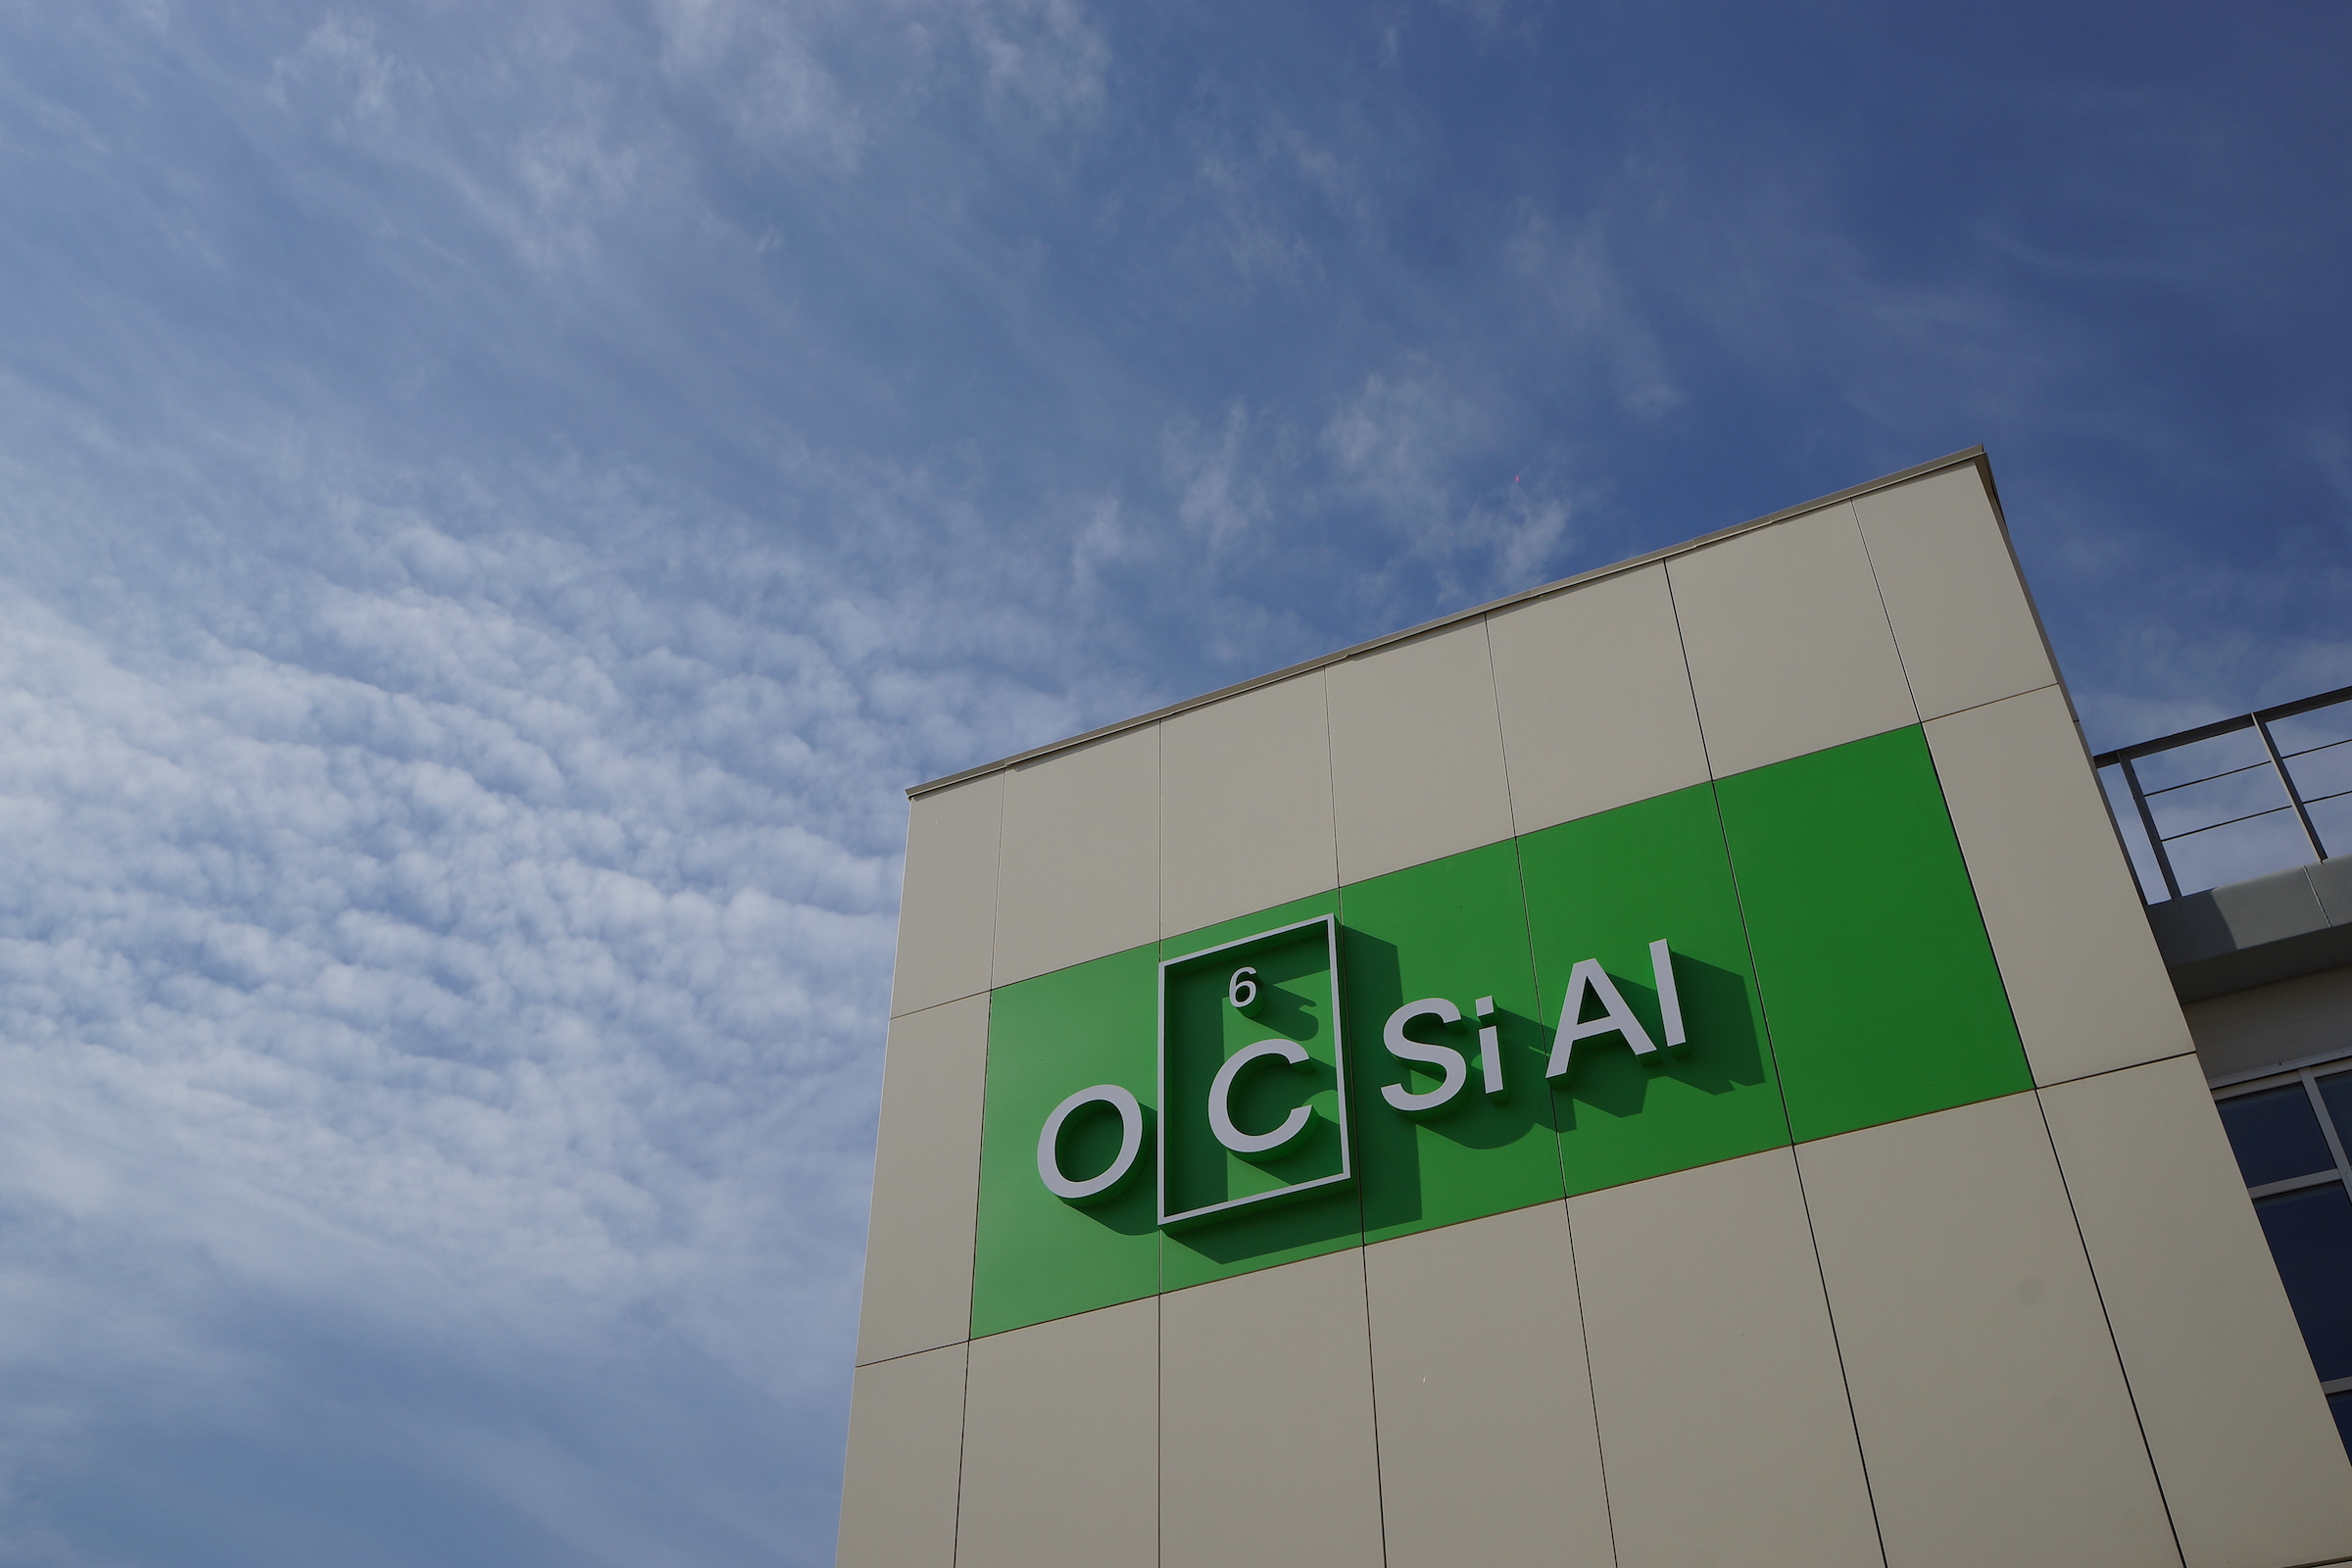 OCSiAl is valued at about $2 billion and has redeemed RUSNANO bonds ahead of schedule